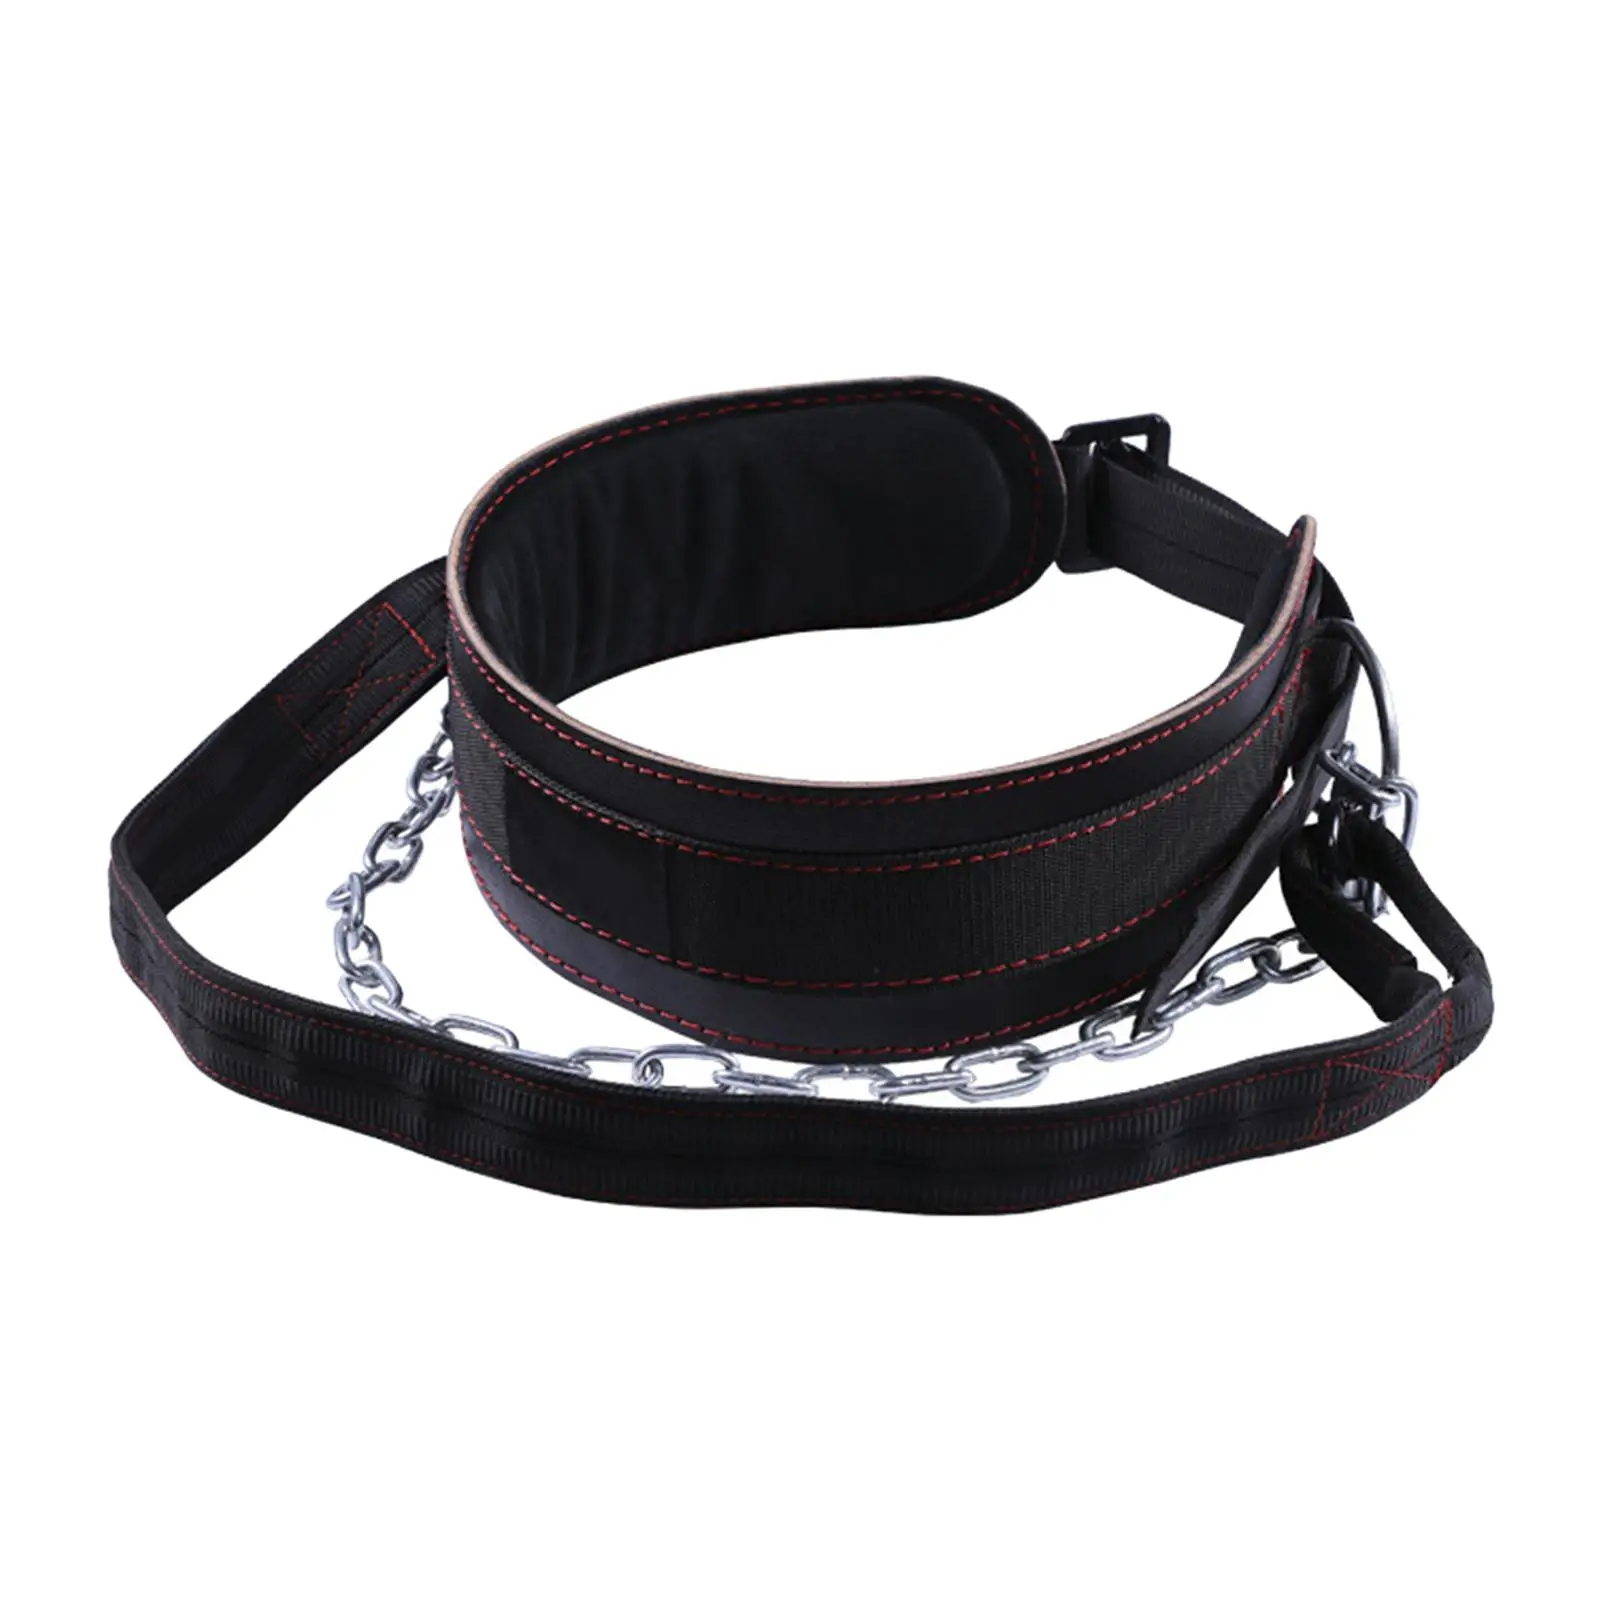 PU Dip Belt with Lifting Chain with Buckle Spandex Comfort Comfortable Waist Support Chin Dips Weight Belt for Strength Training